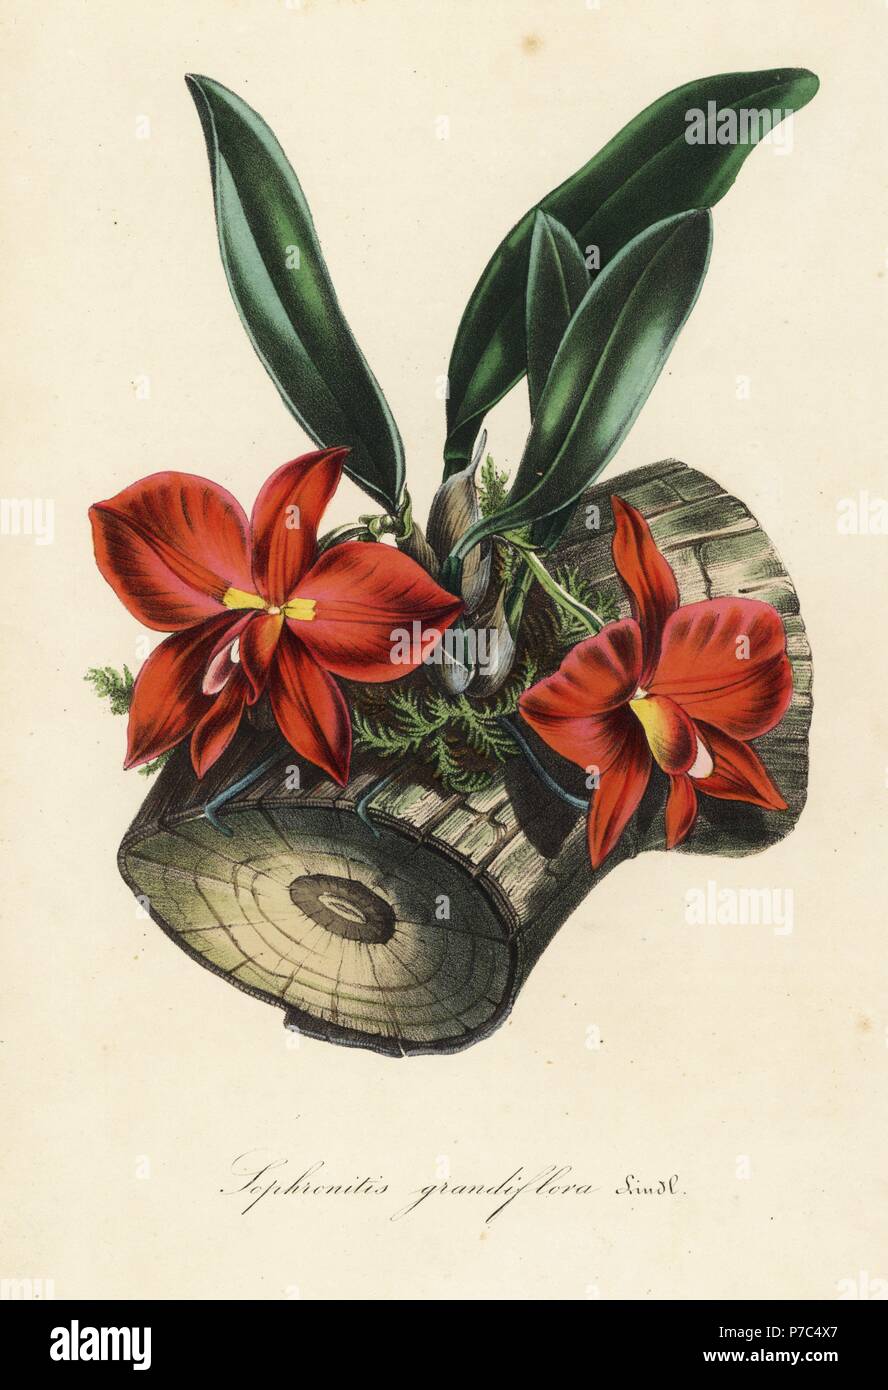 Cattleya coccinea orchid (Sophronitis grandiflora). Handcoloured lithograph from Louis van Houtte and Charles Lemaire's Flowers of the Gardens and Hothouses of Europe, Flore des Serres et des Jardins de l'Europe, Ghent, Belgium, 1845. Stock Photo